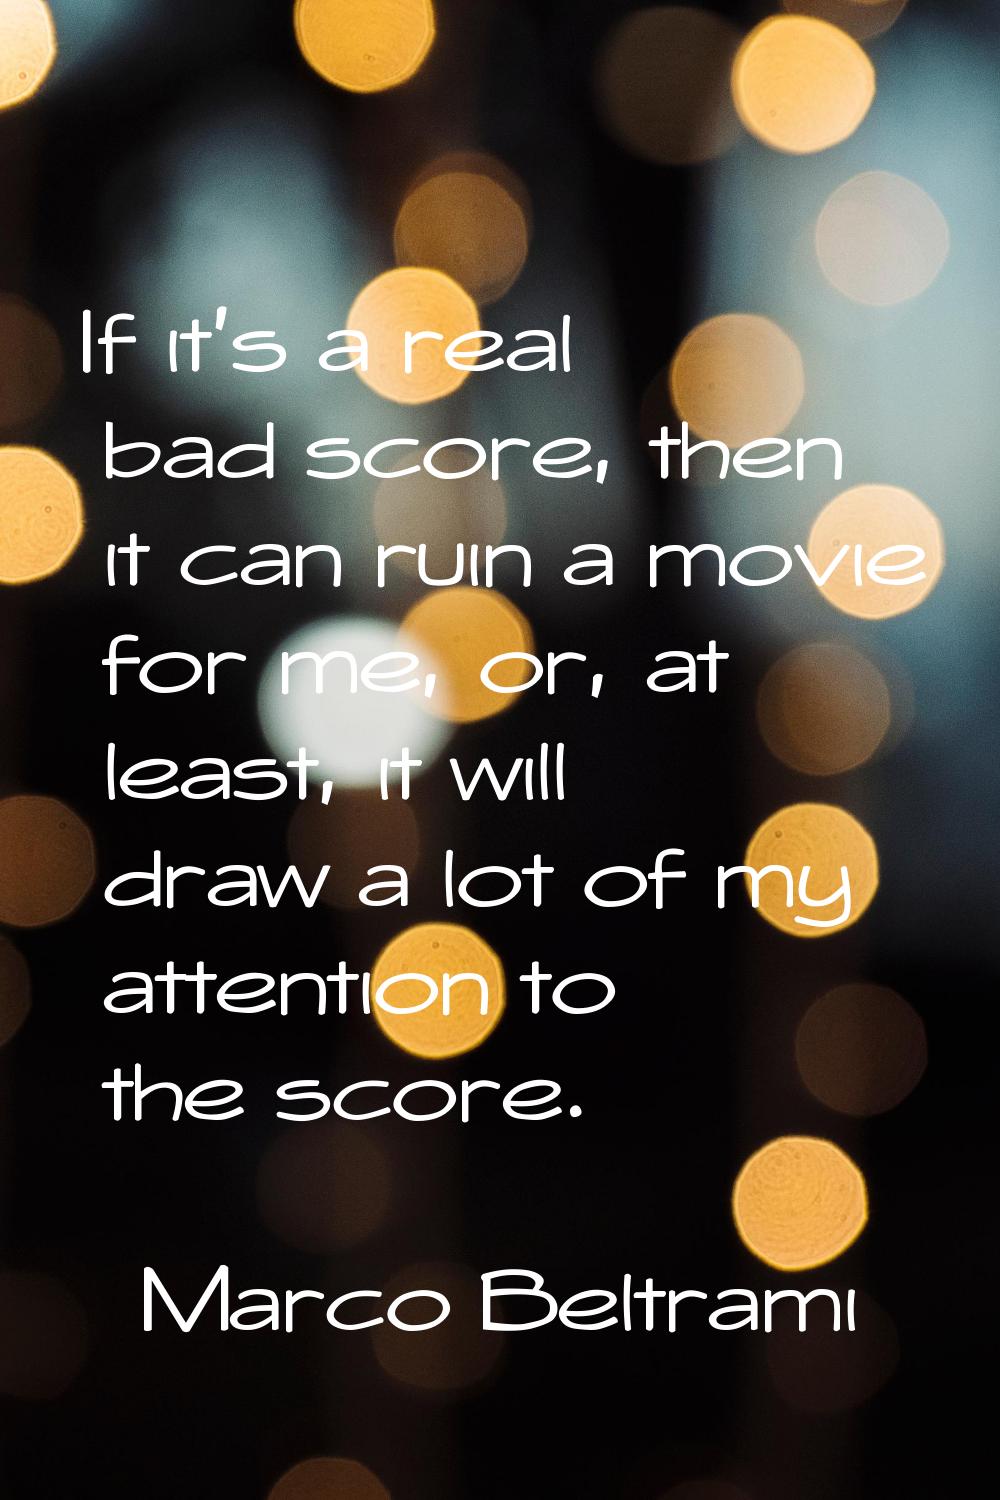 If it's a real bad score, then it can ruin a movie for me, or, at least, it will draw a lot of my a